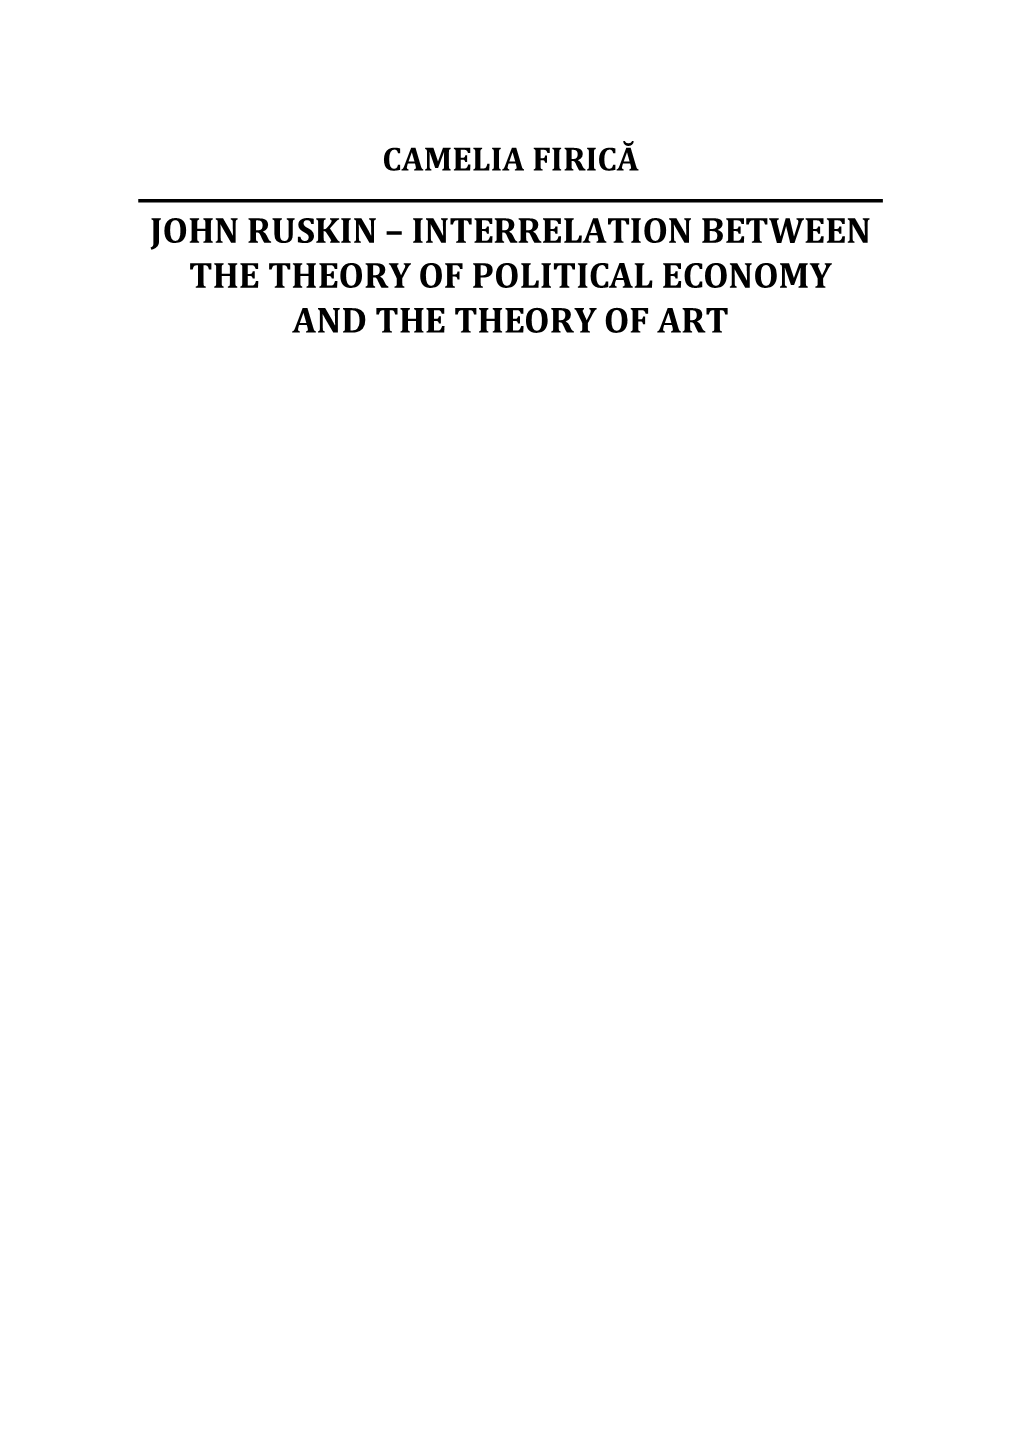 John Ruskin – Interrelation Between the Theory of Political Economy and the Theory of Art